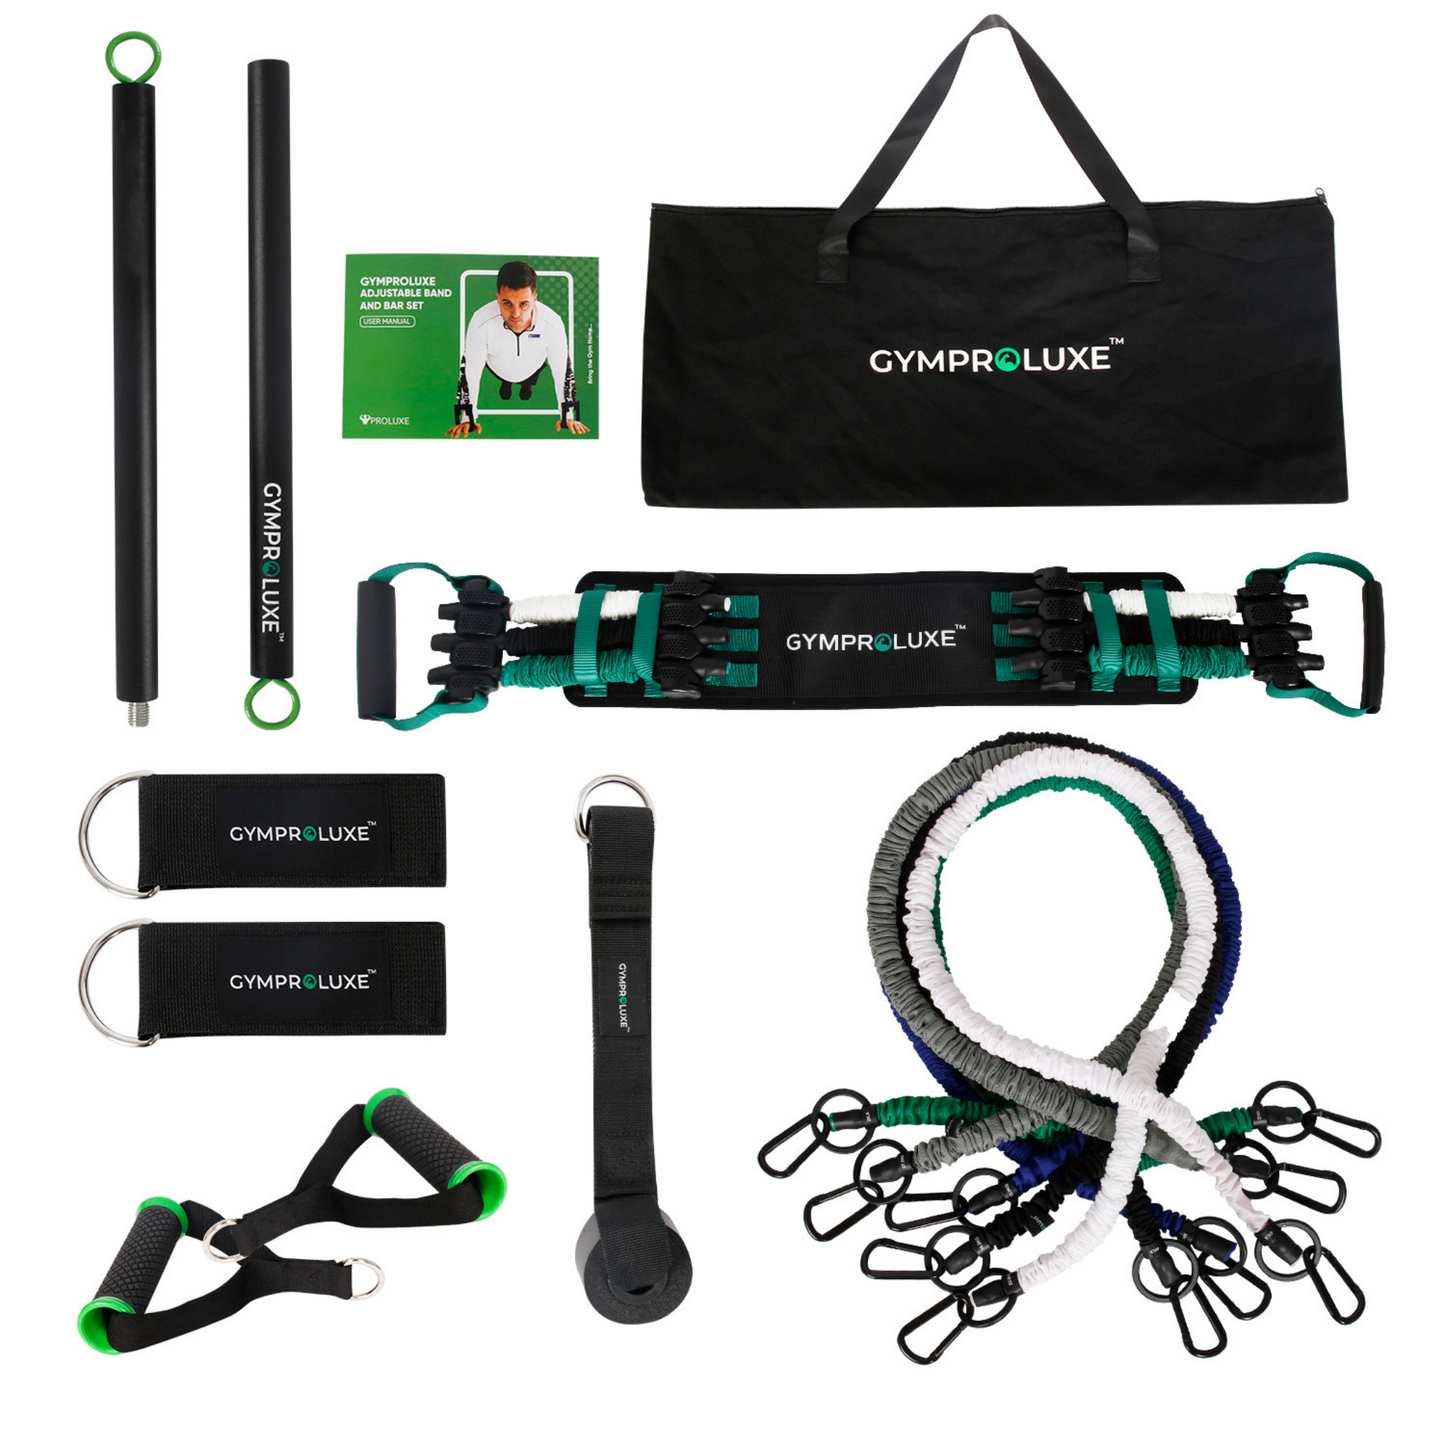 GYMPROLUXE All in one portable gym - Gymproluxe